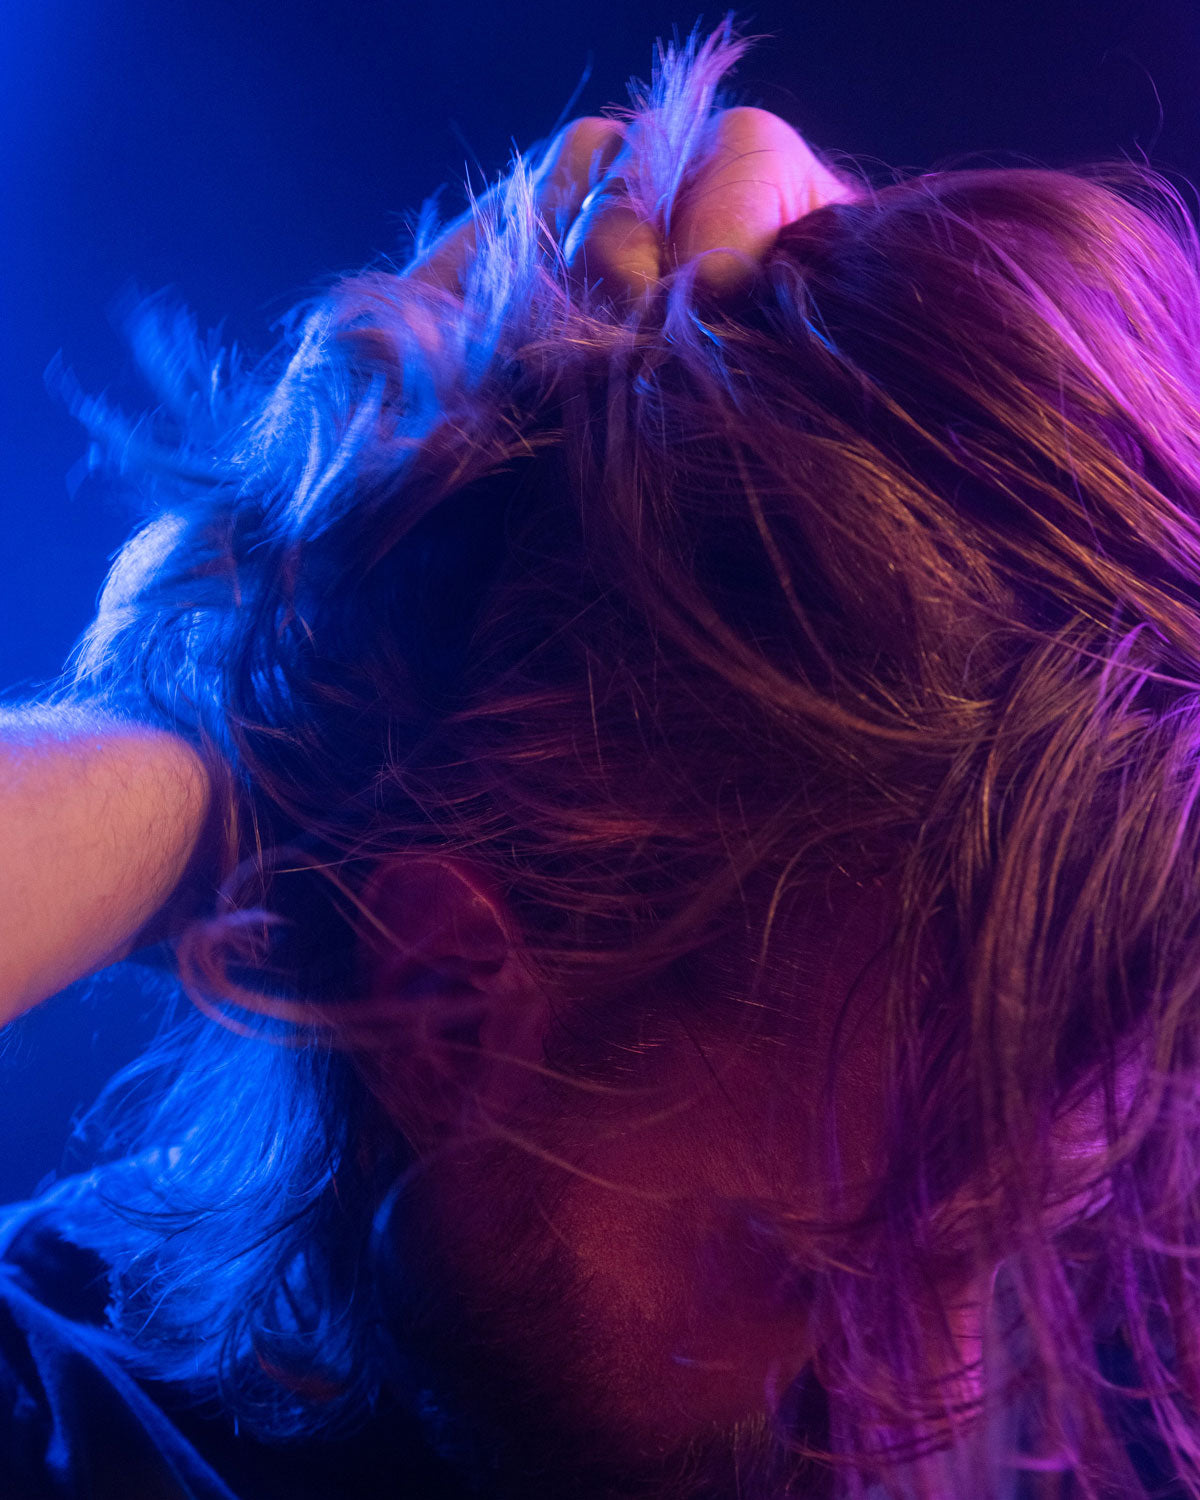 Eric running hands through his long hair highlighted under vibrant lighting. His head is angled down towards the right.